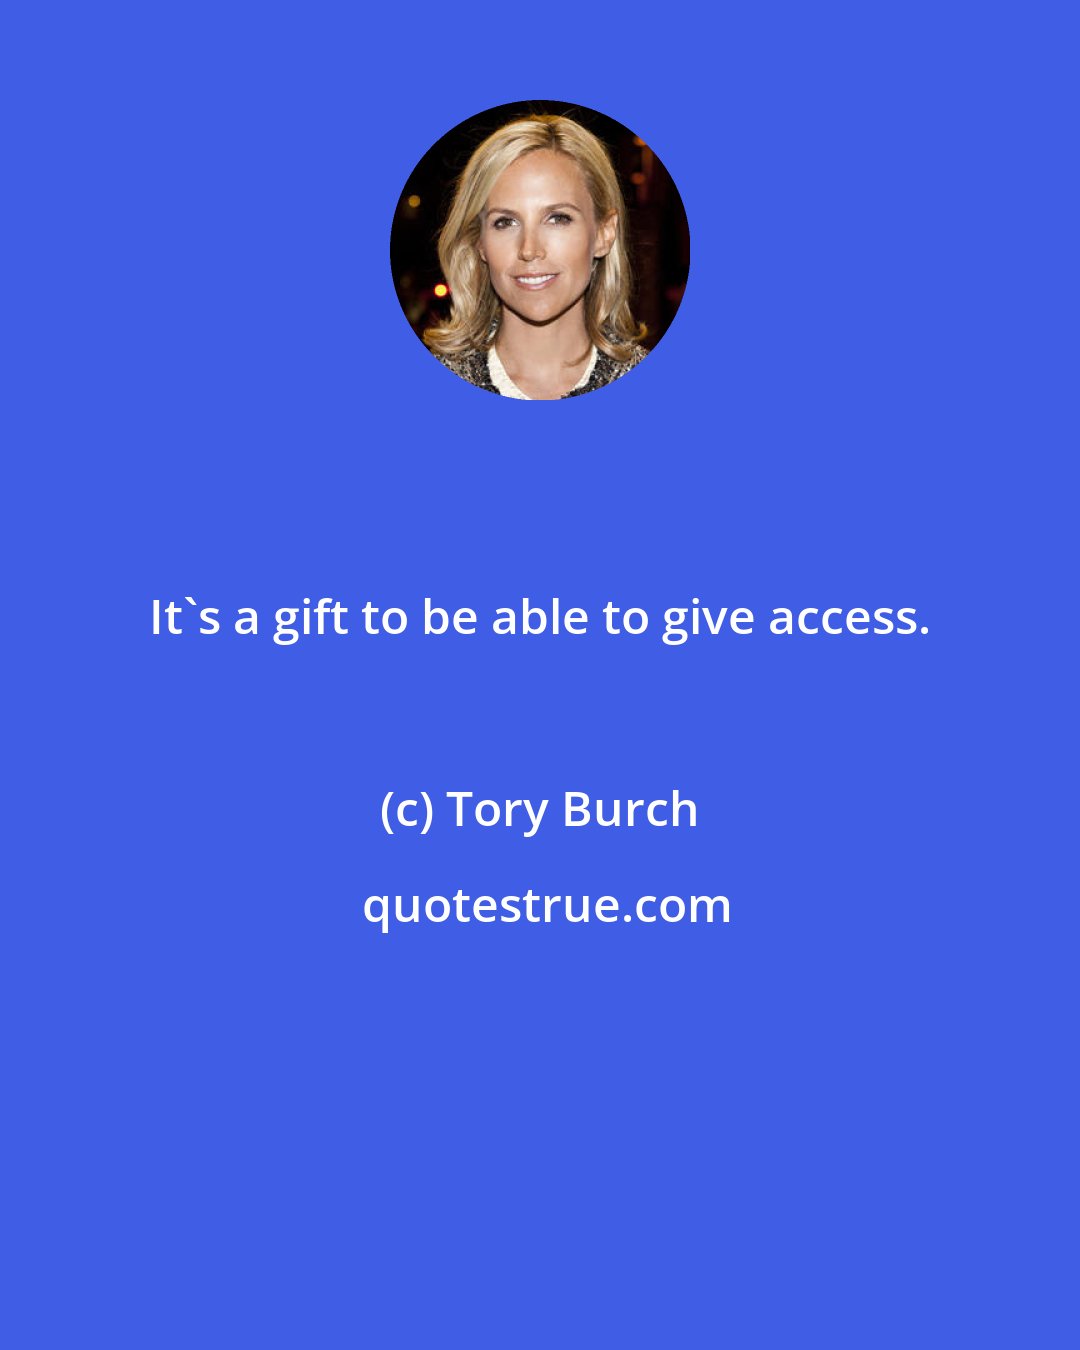 Tory Burch: It's a gift to be able to give access.